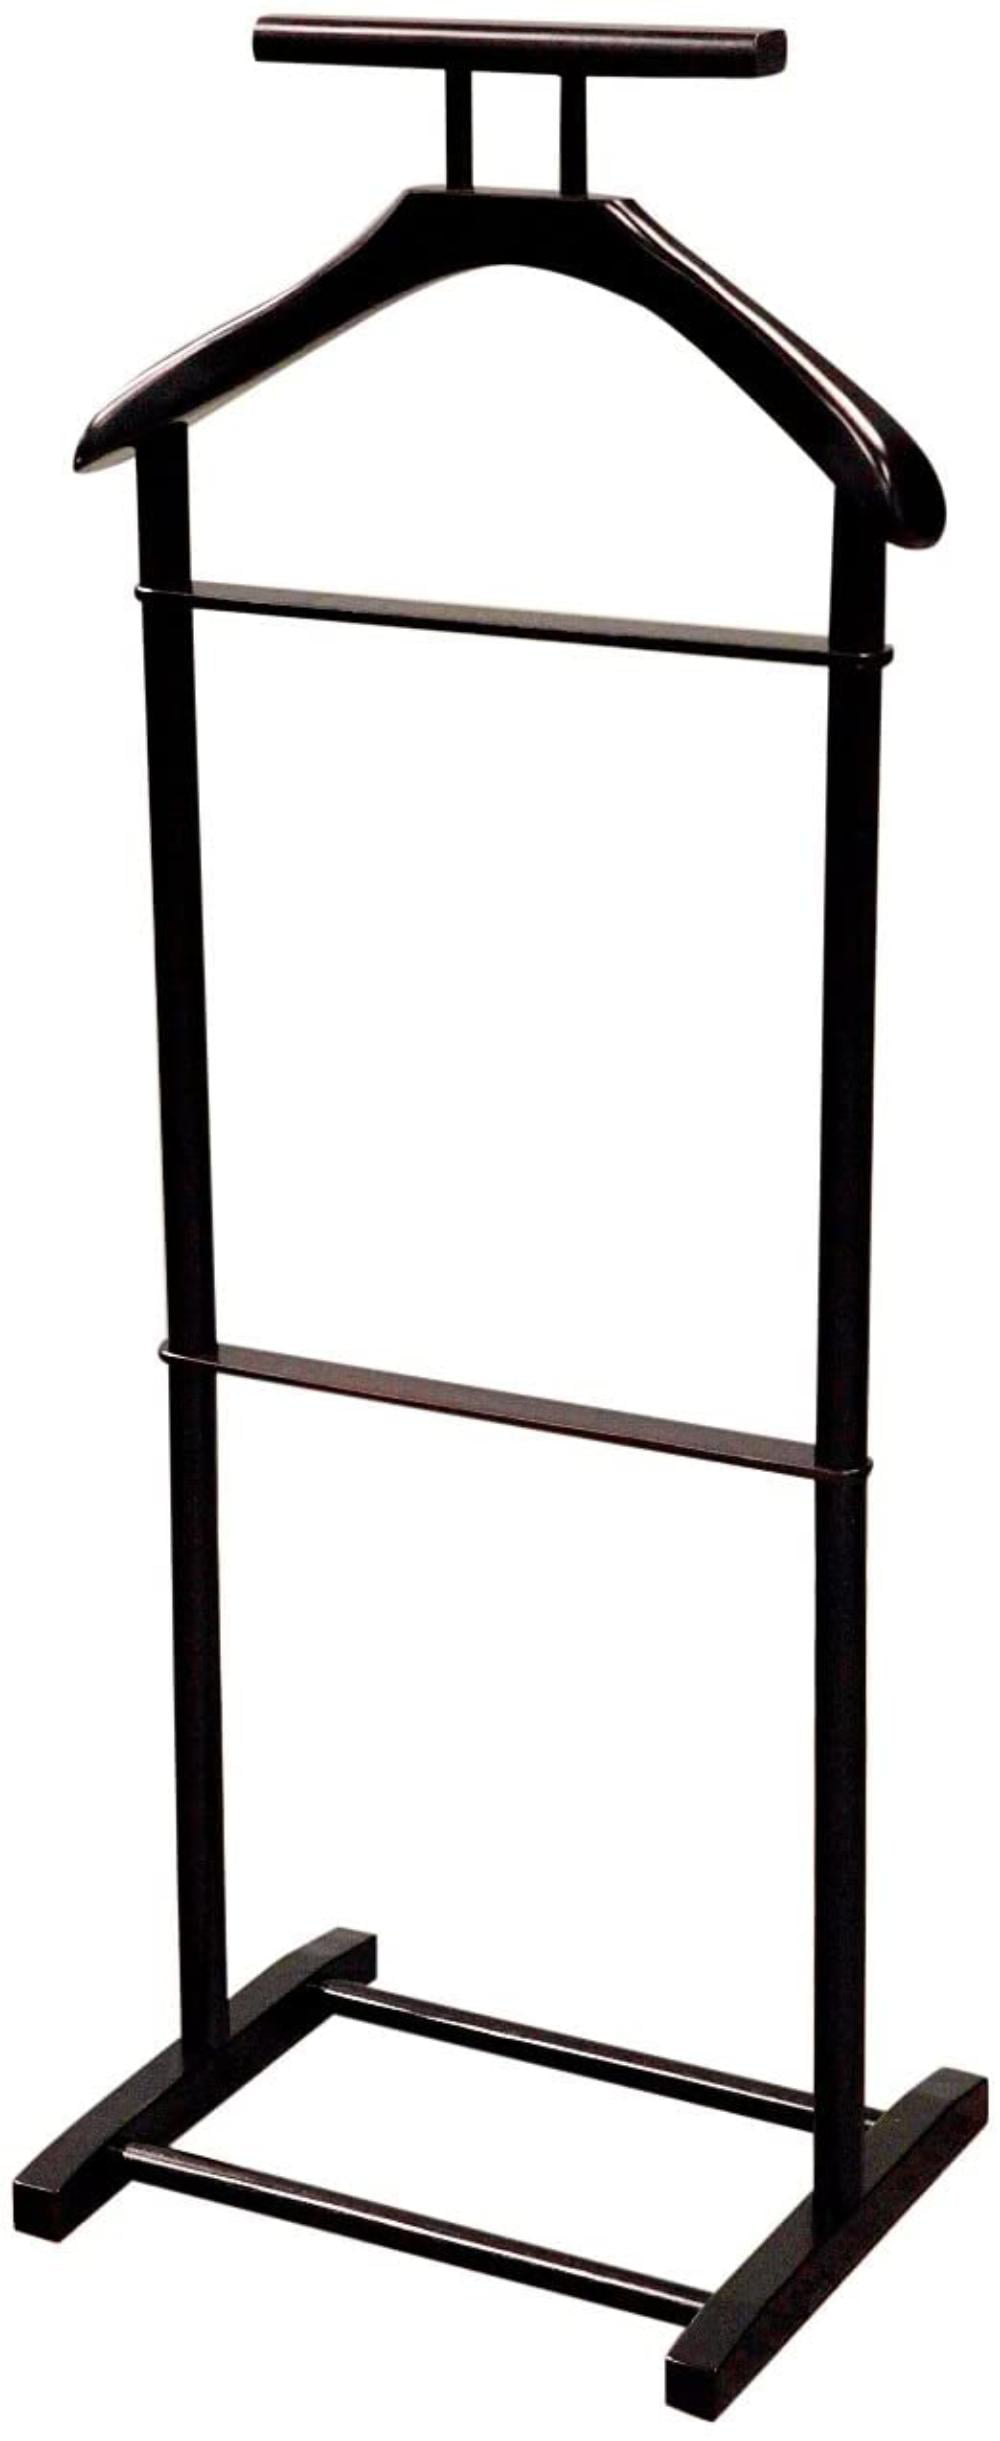 Frenchi Home Furnishing Men Suit Valet Stand with Suit Hanger 